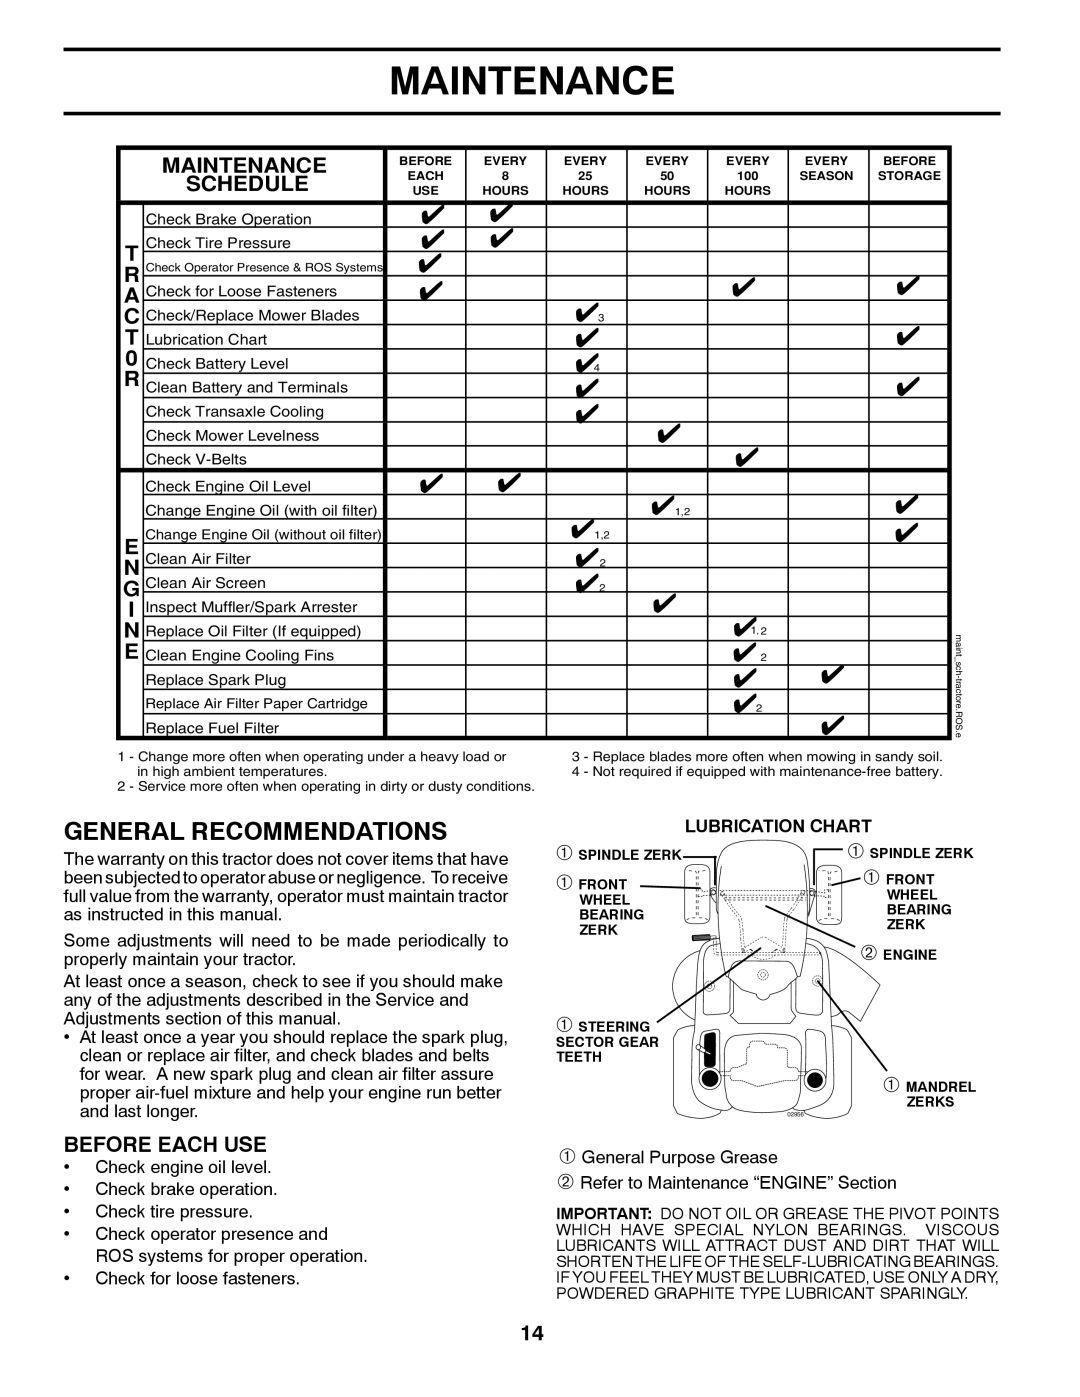 Husqvarna YTH2146XP owner manual Maintenance, General Recommendations, Schedule, Before Each Use 